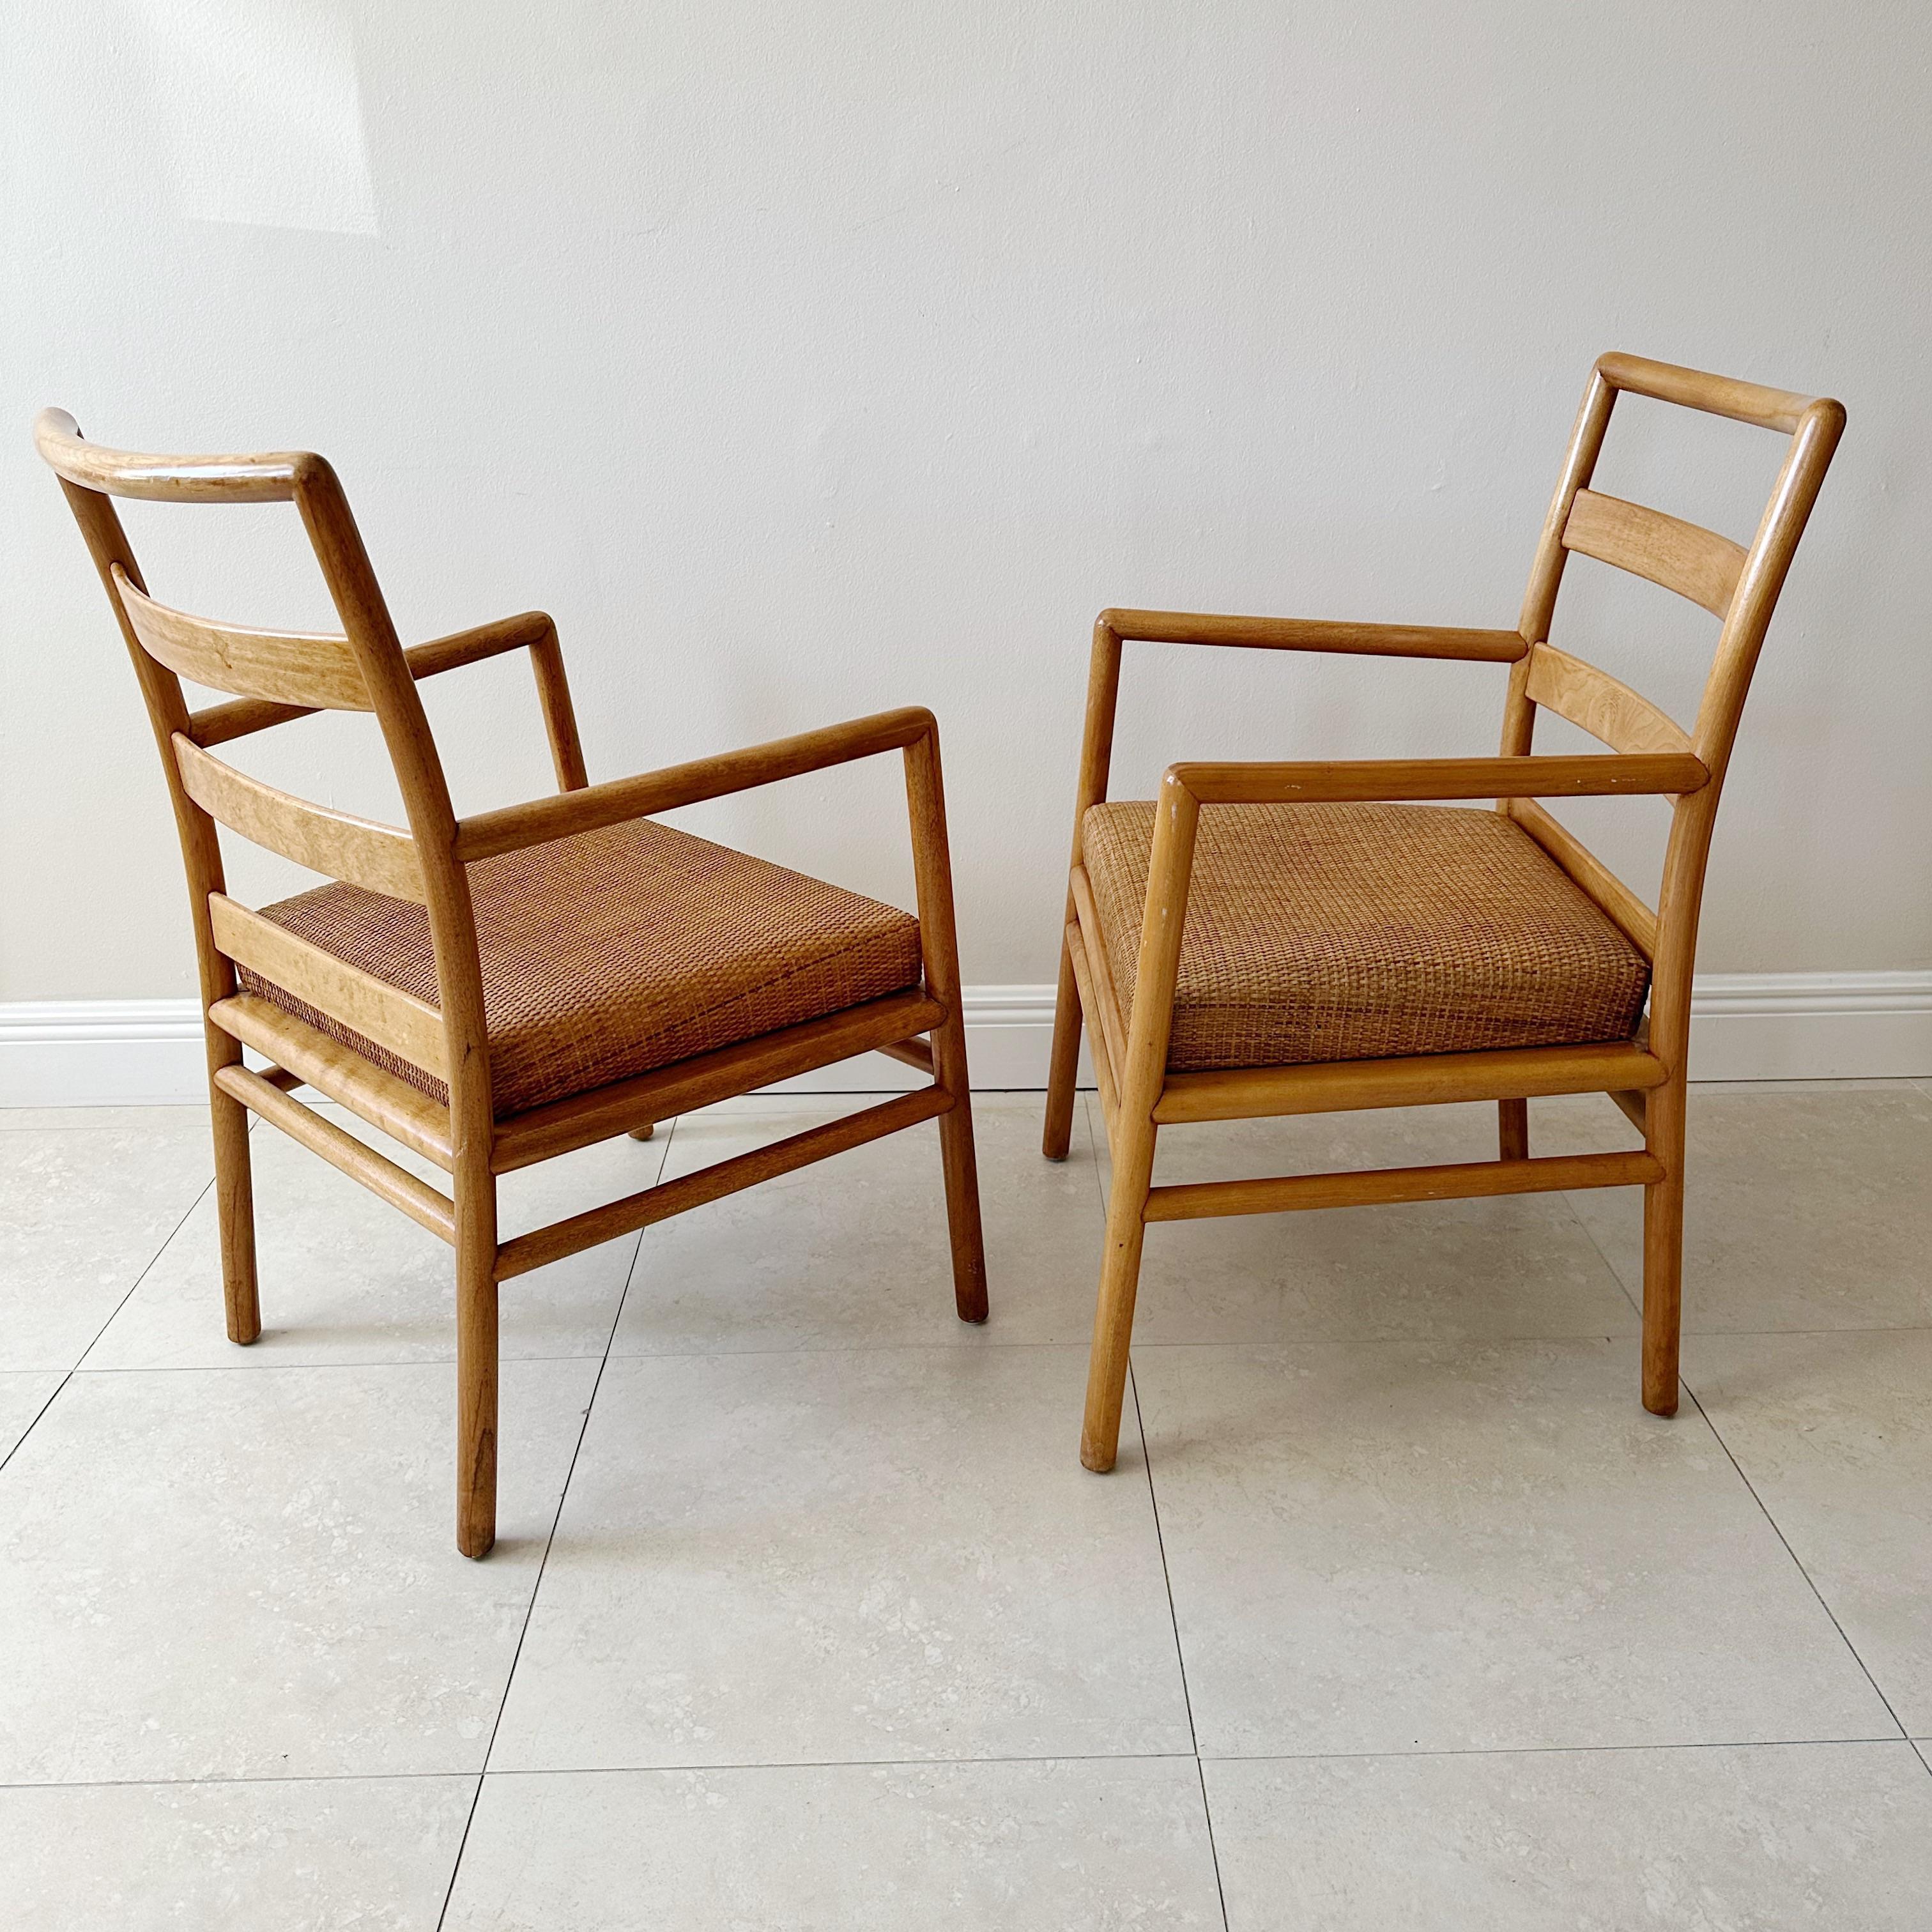 Hand-Crafted Pair of T. H. Robsjohn Gibbings for Widdicomb Ladderback & Woven Rattan Seat Arm For Sale